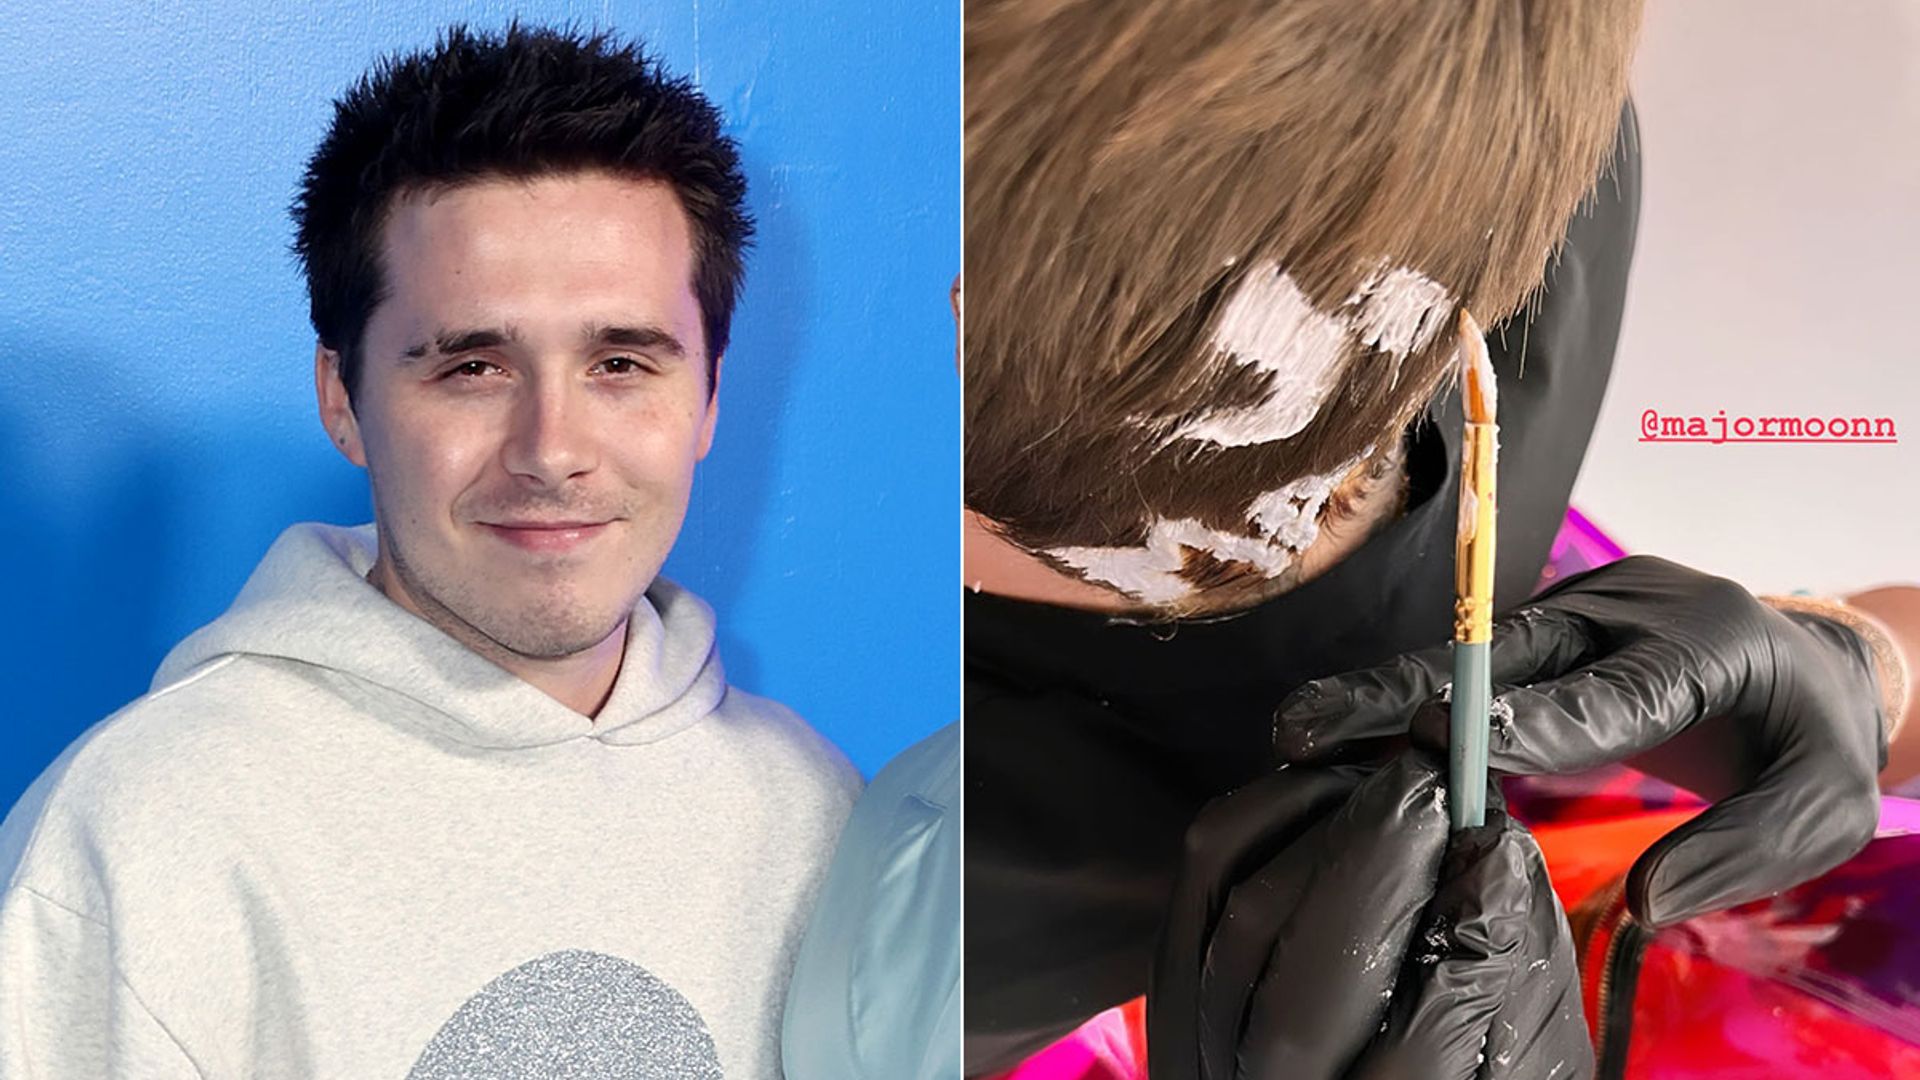 Brooklyn Beckham gets shocking new hairstyle following release of new wedding photos